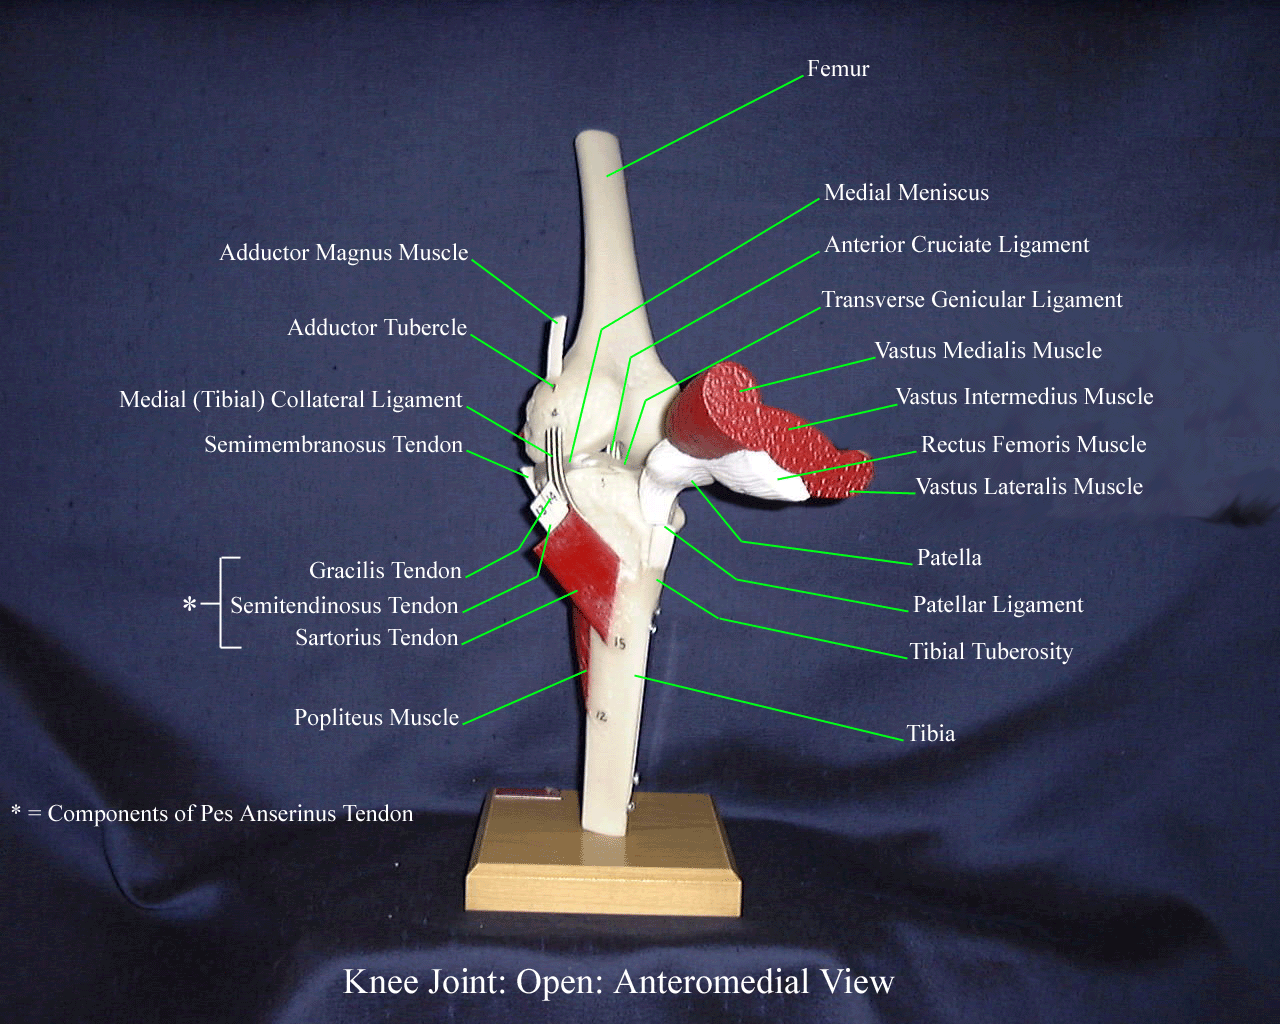 a labeled picture of a knee model indicating some of the intrinsic structures of the knee